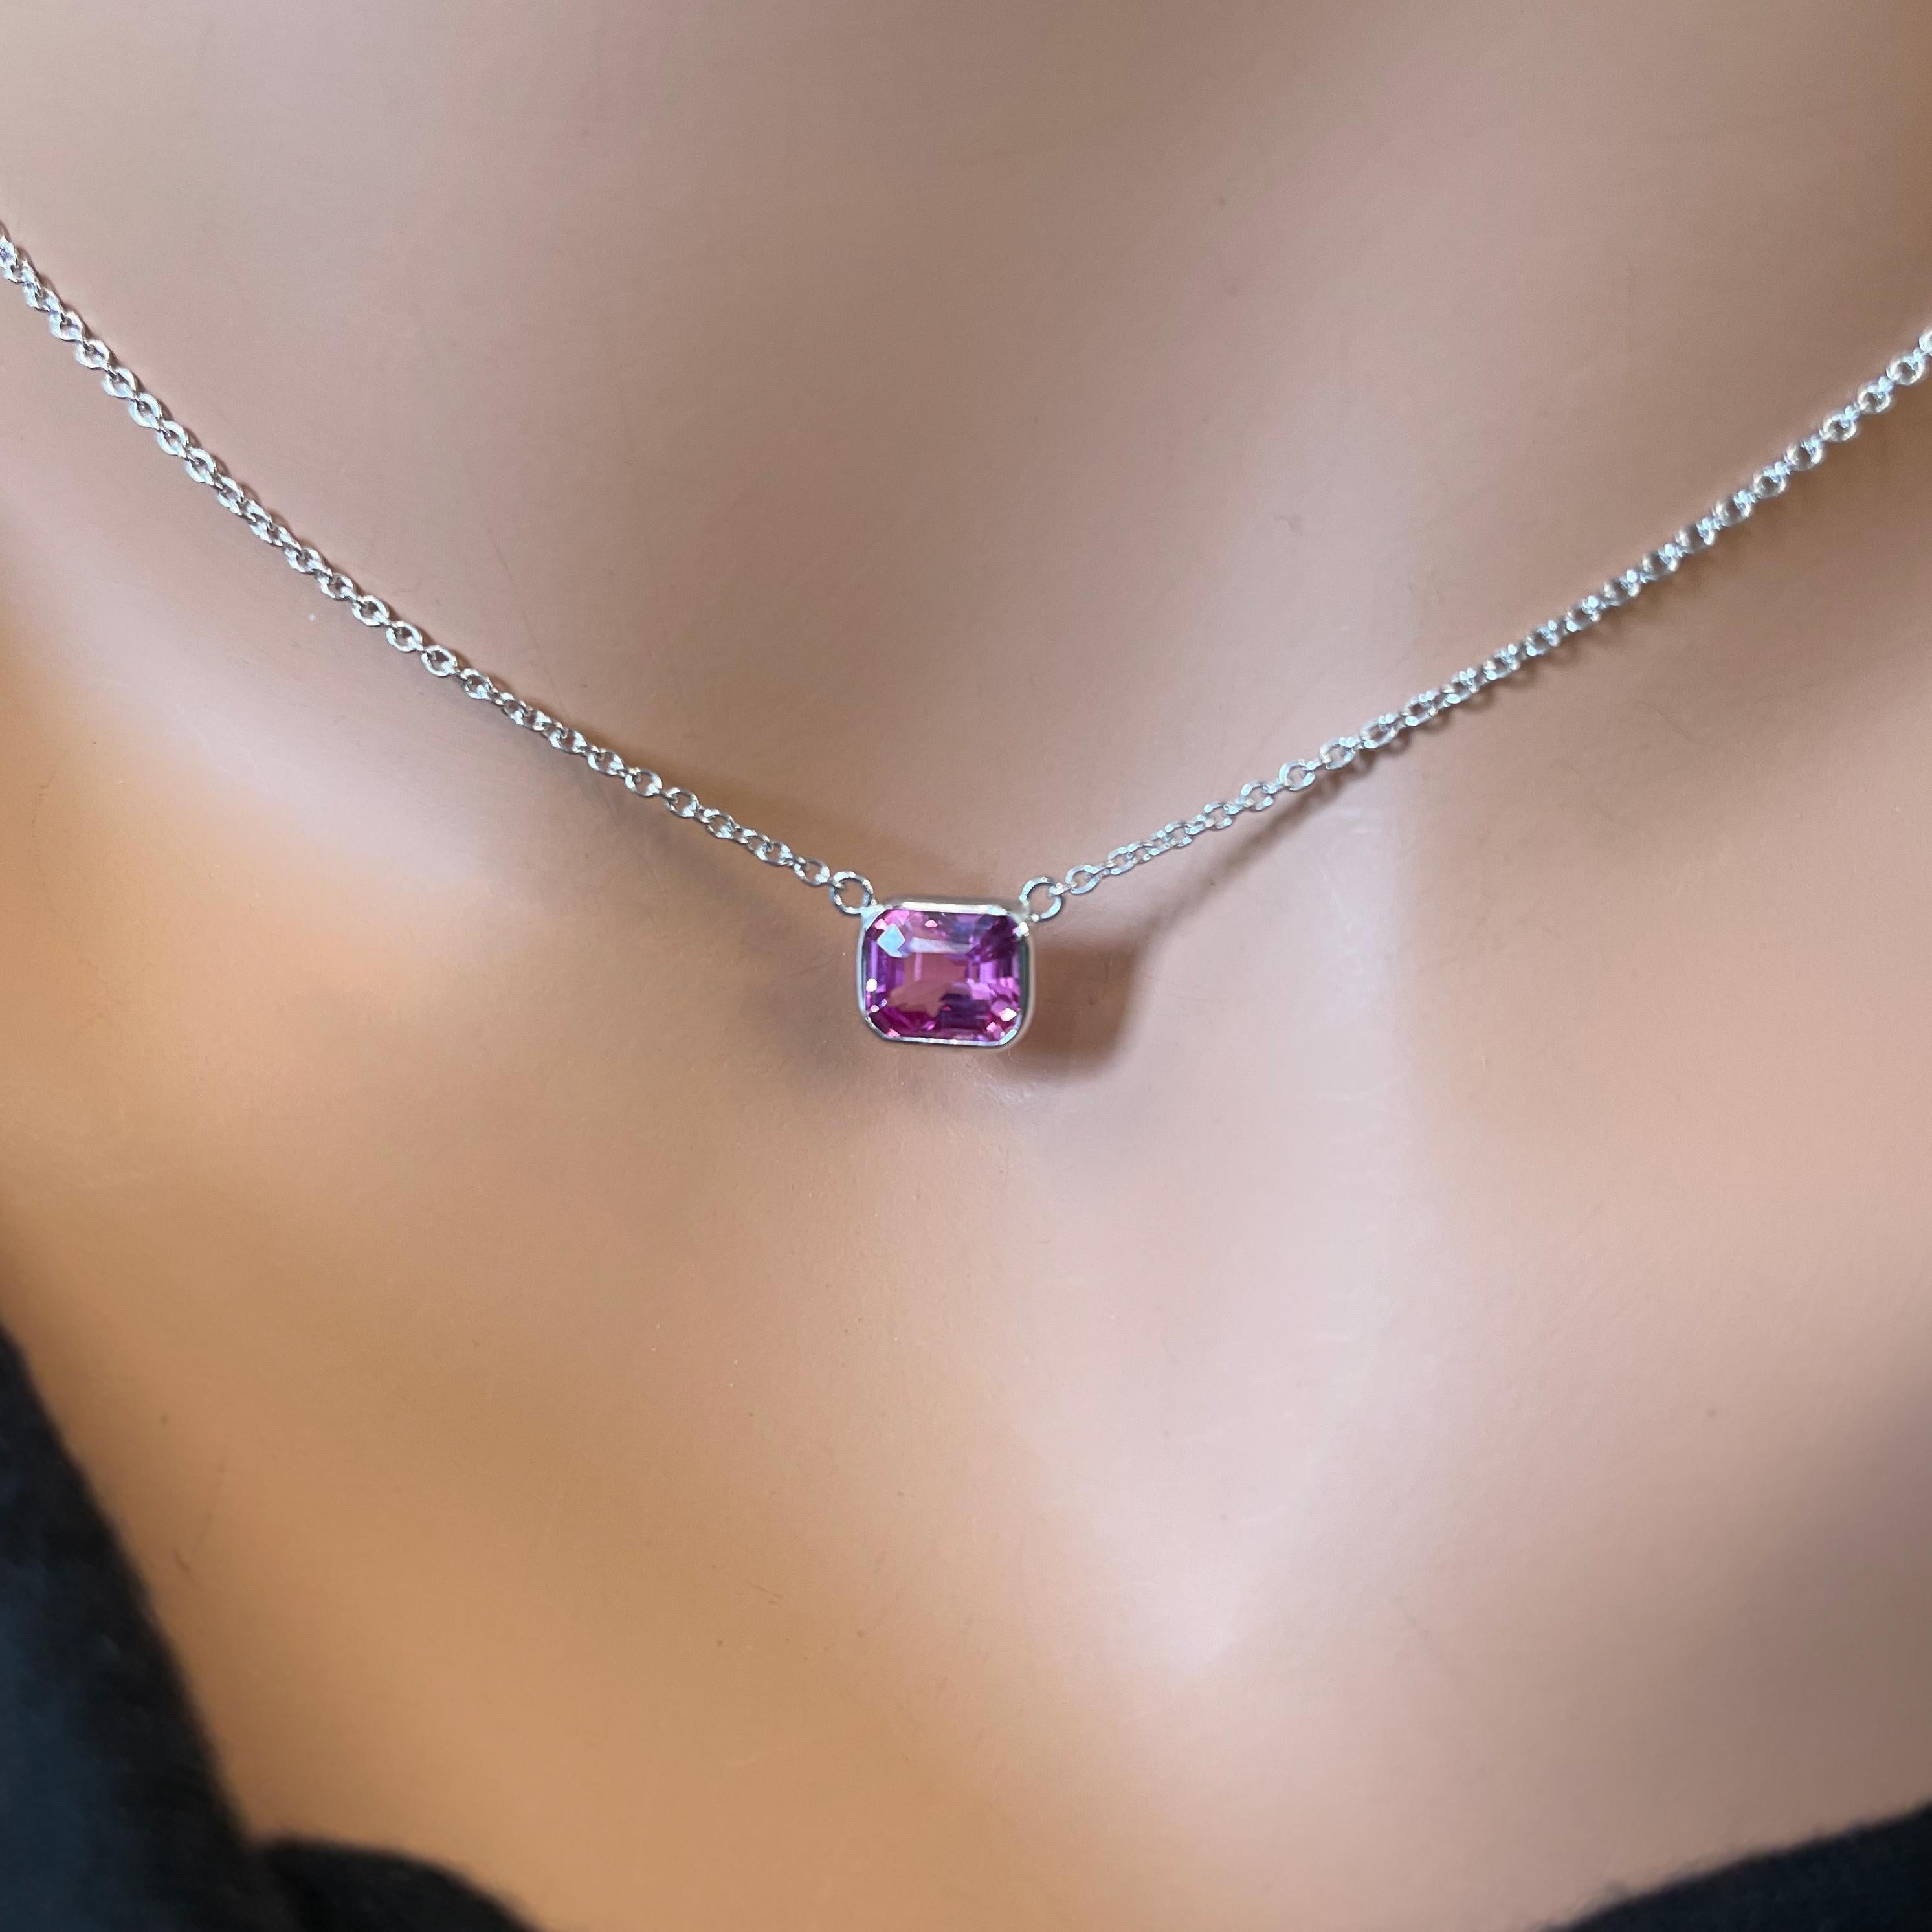 Contemporary 1.60 Carat Emerald Cut Pink Sapphire Fashion Necklaces In 14K White Gold   For Sale